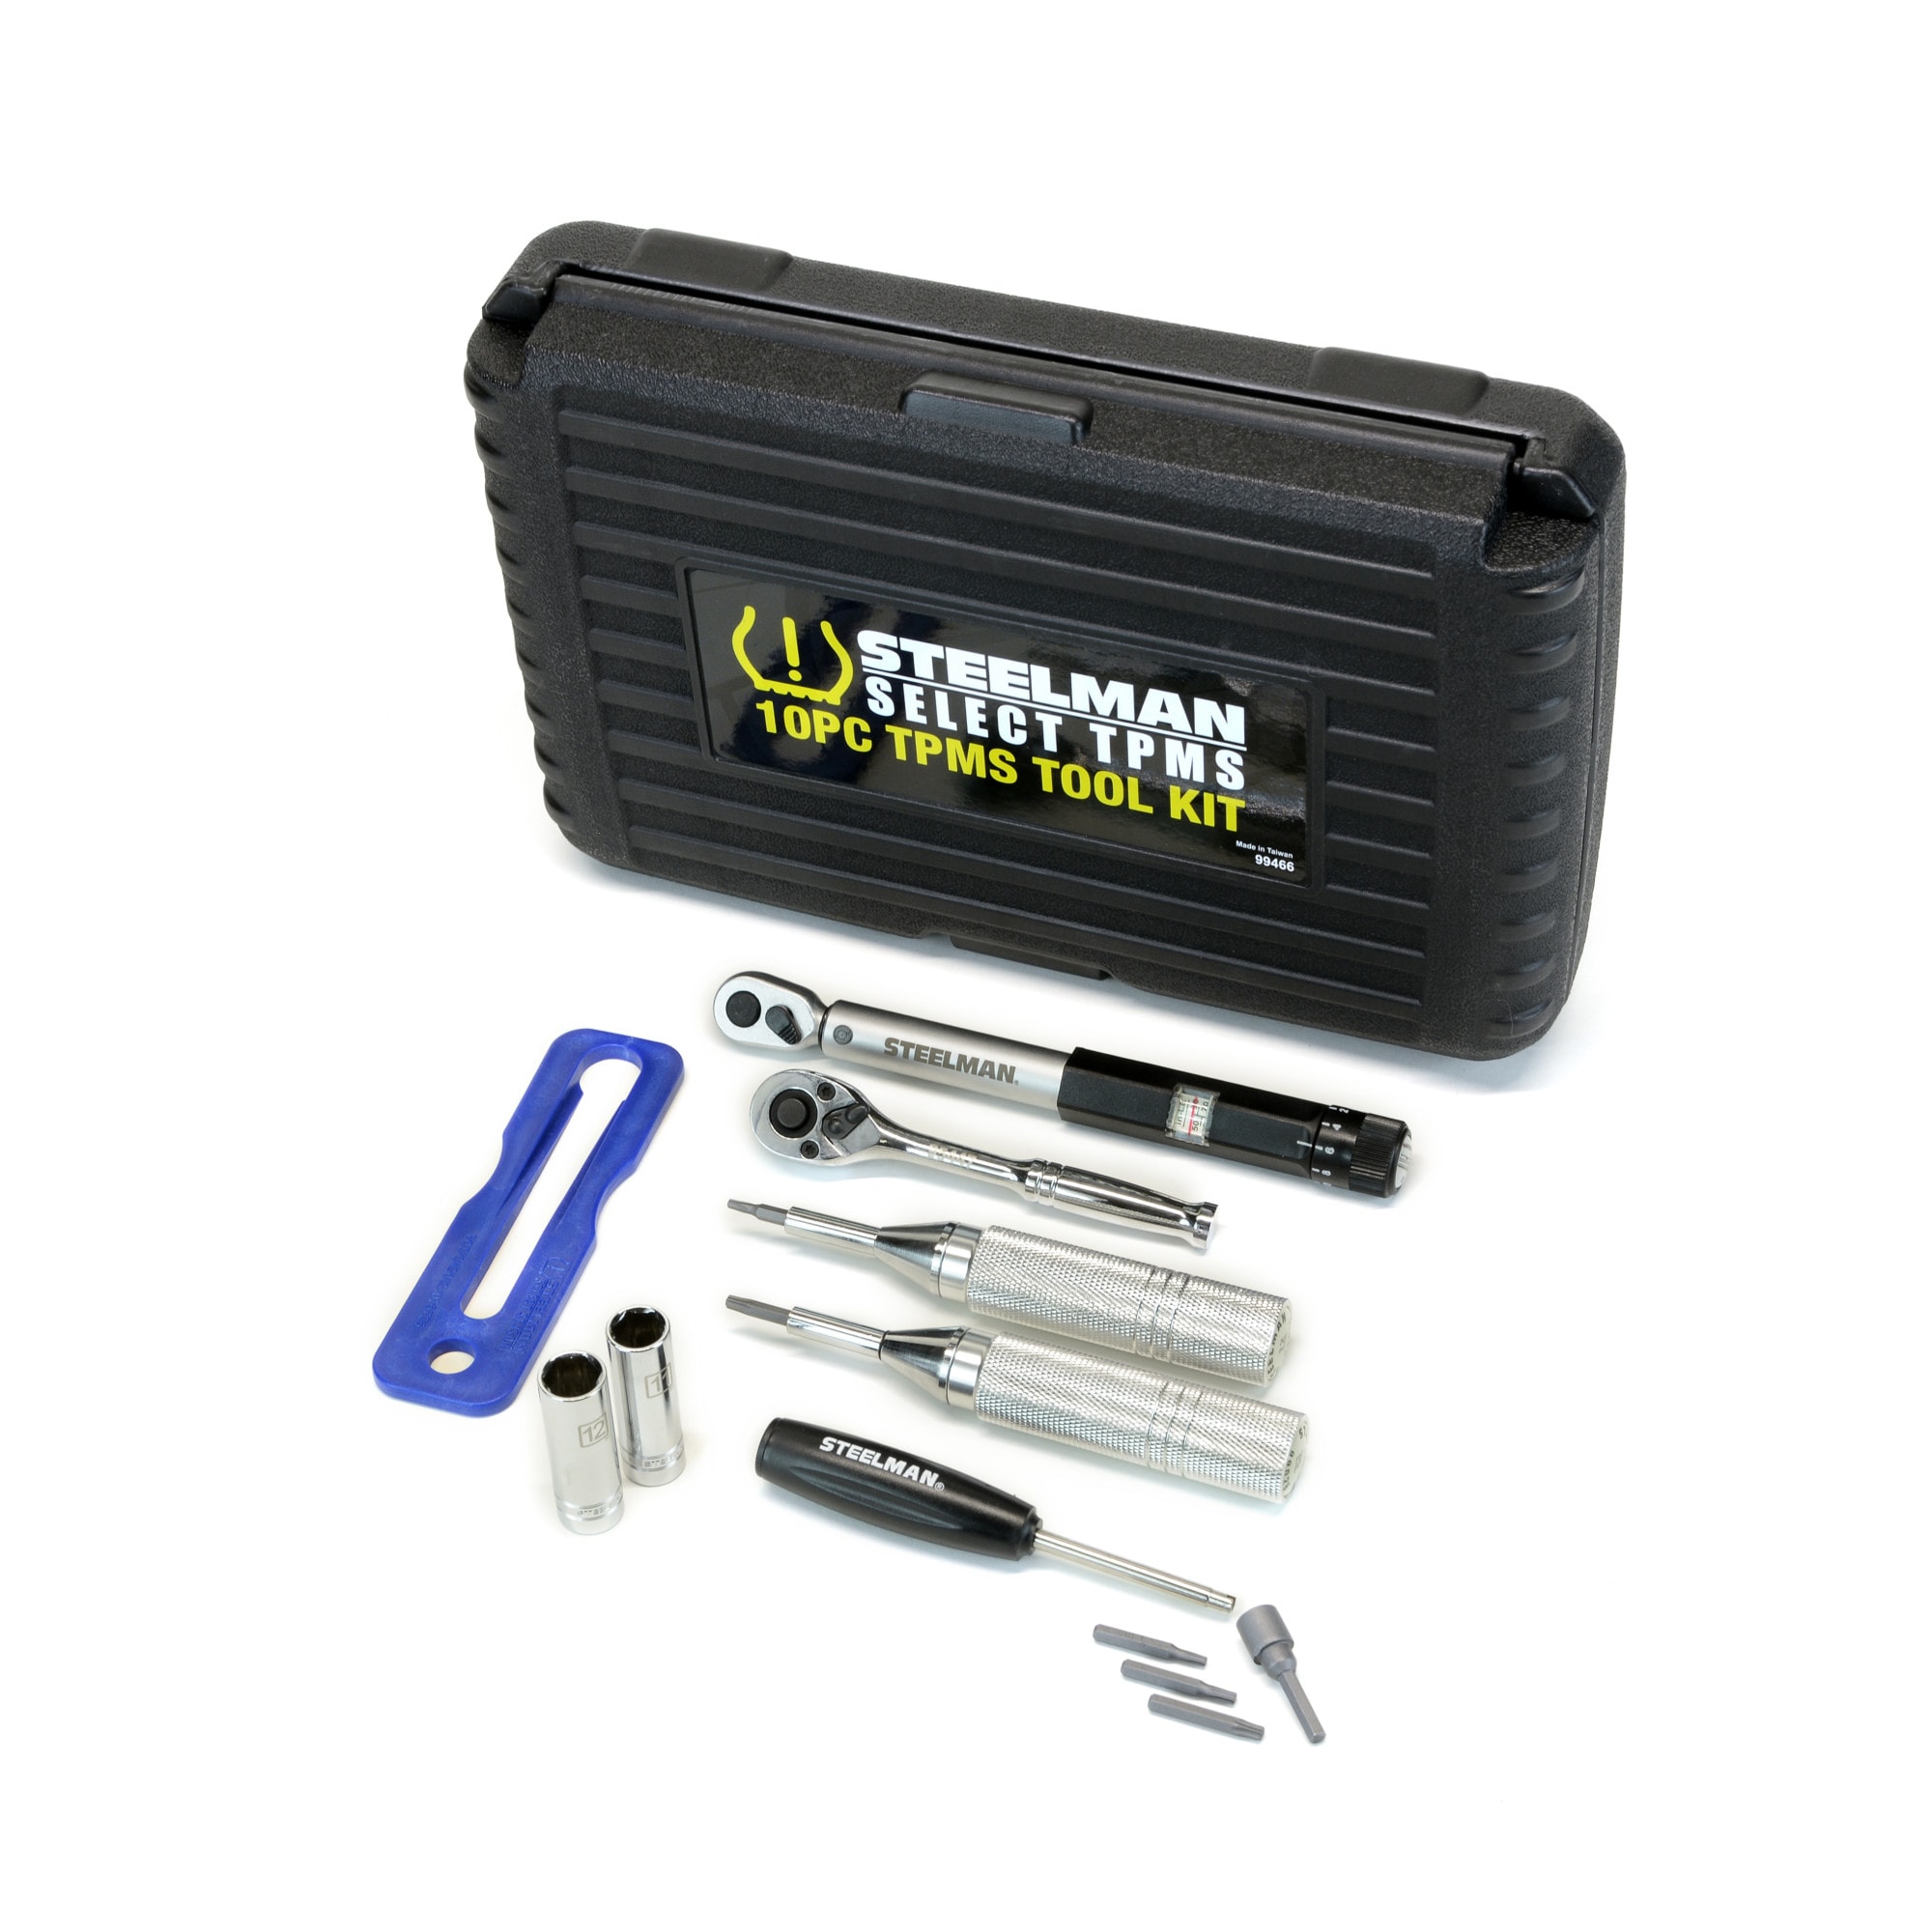 STEELMAN Tire Marking Crayon(s) in the Tire Repair Tools department at